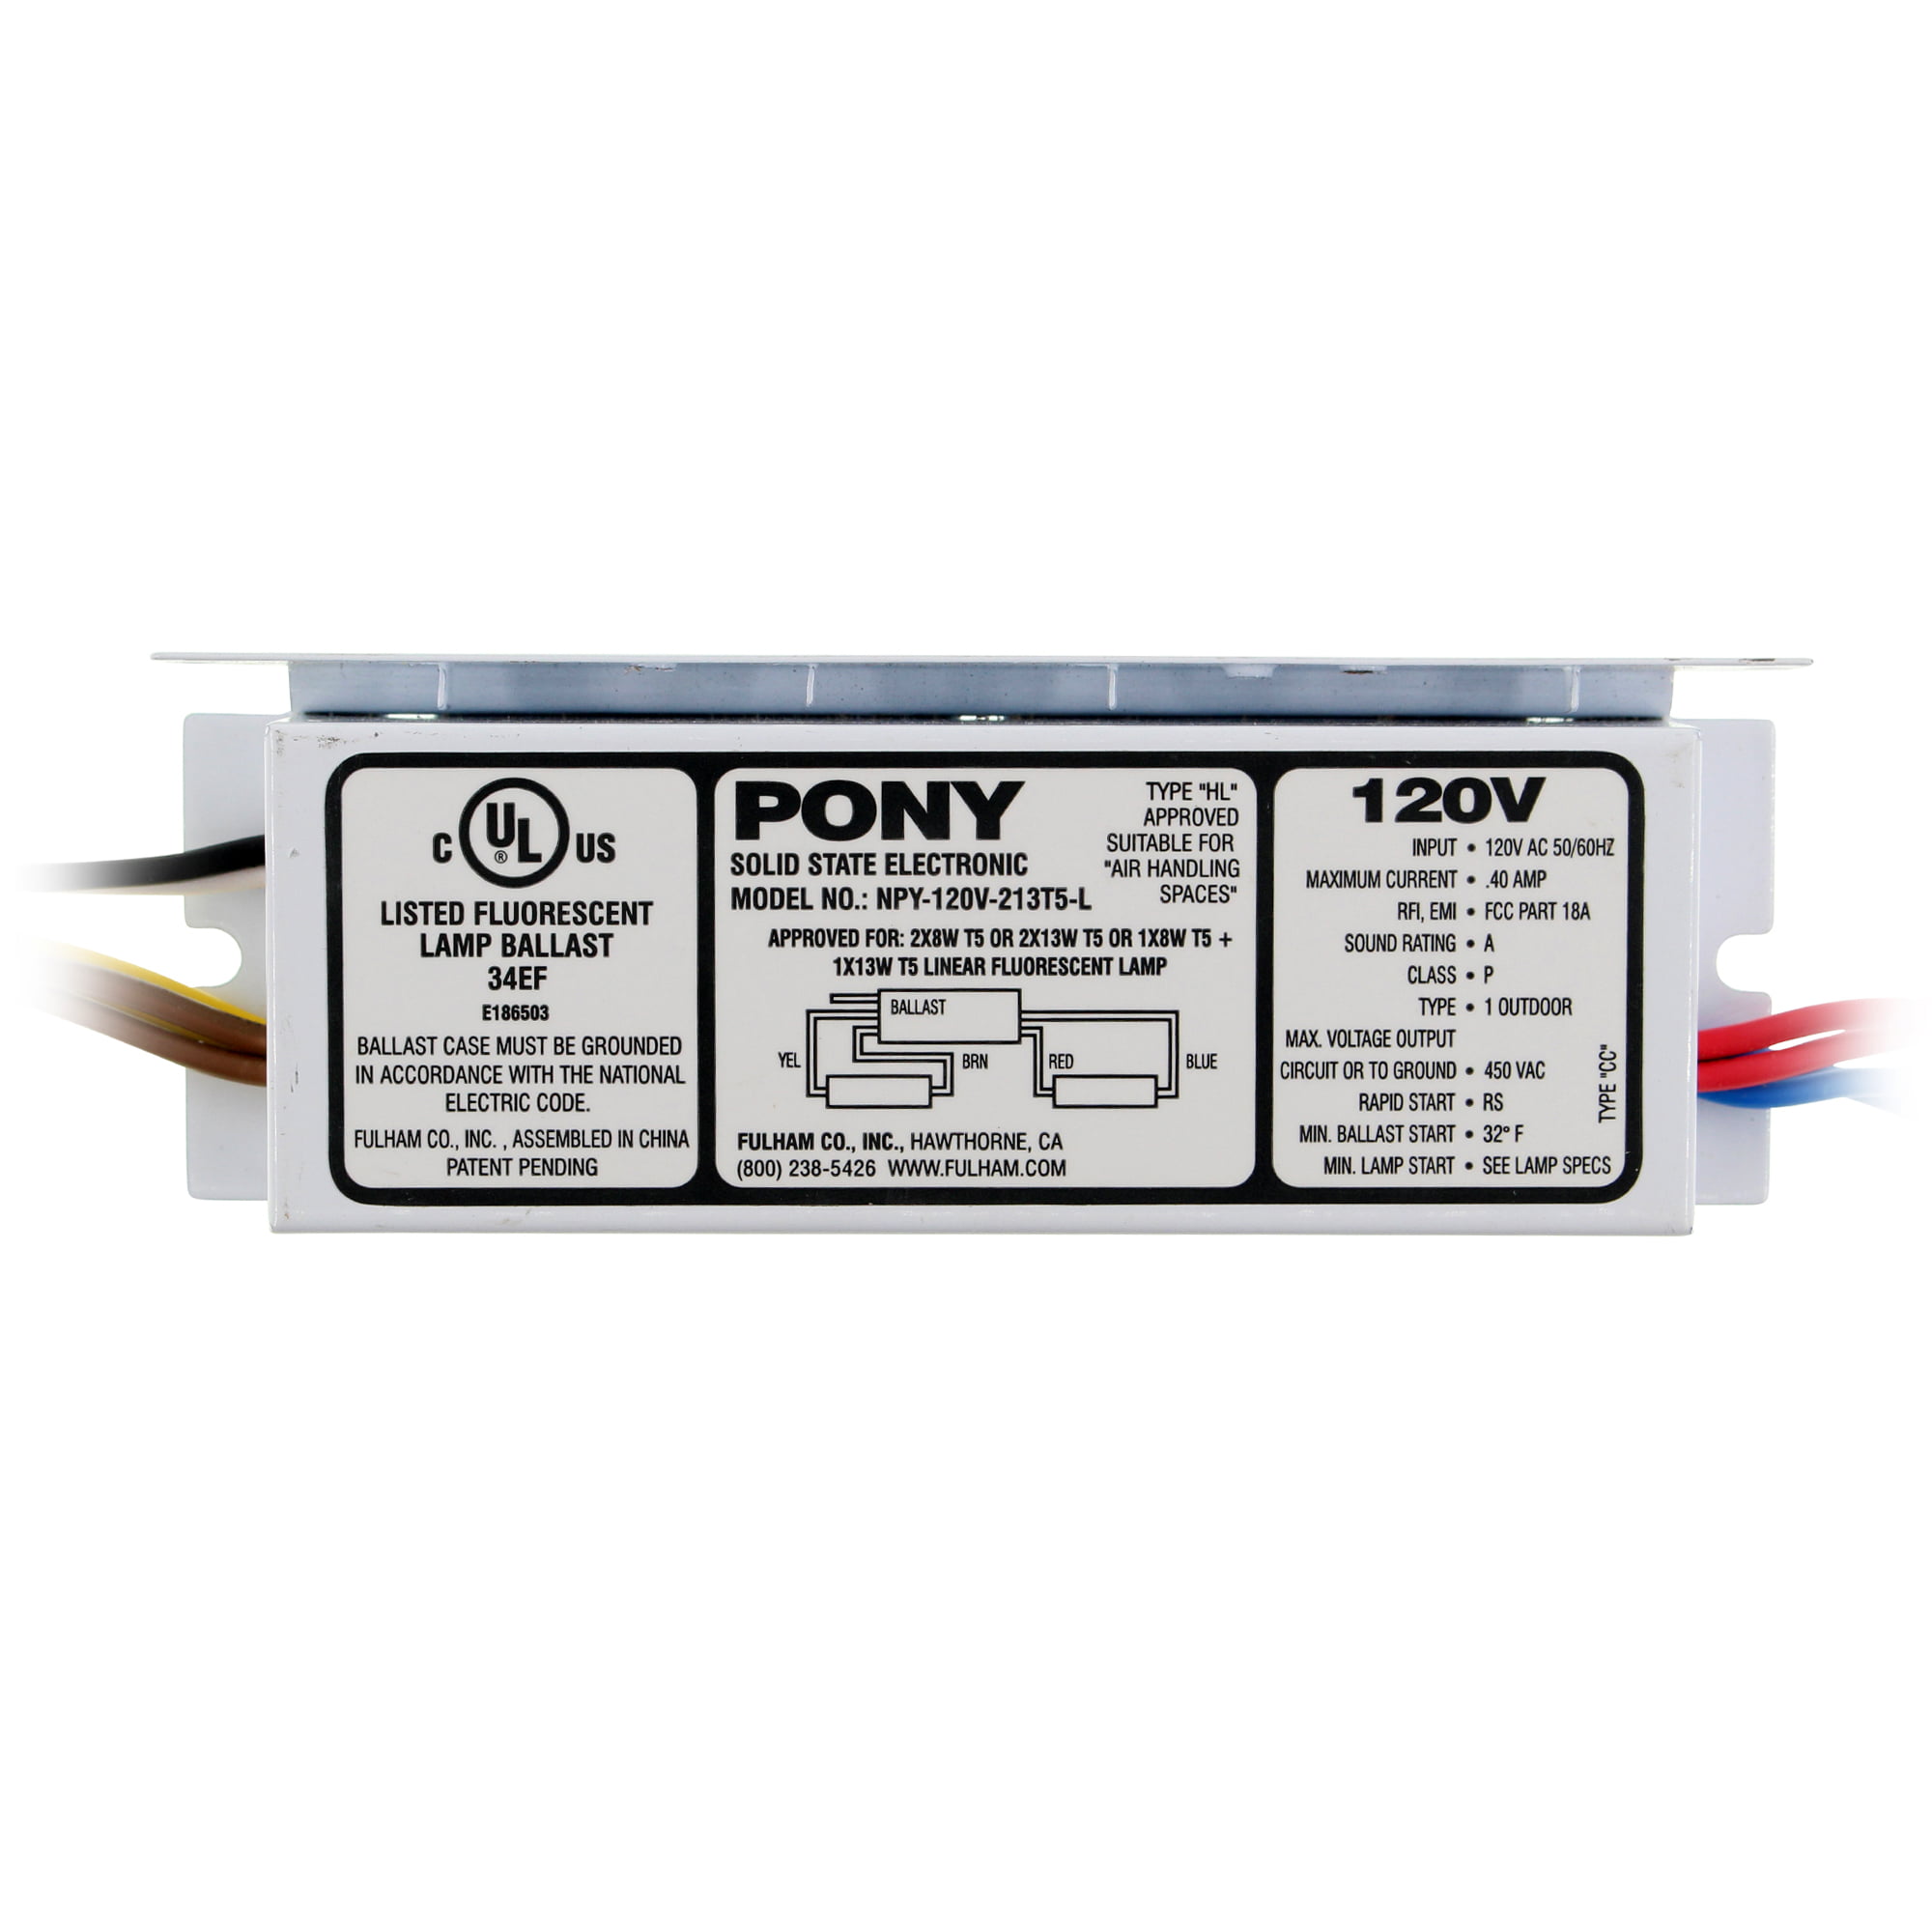 120V 2 New fulham NPY-120-221-LT5 PONY SOLID STATE ELECTRONIC BALLASTS 